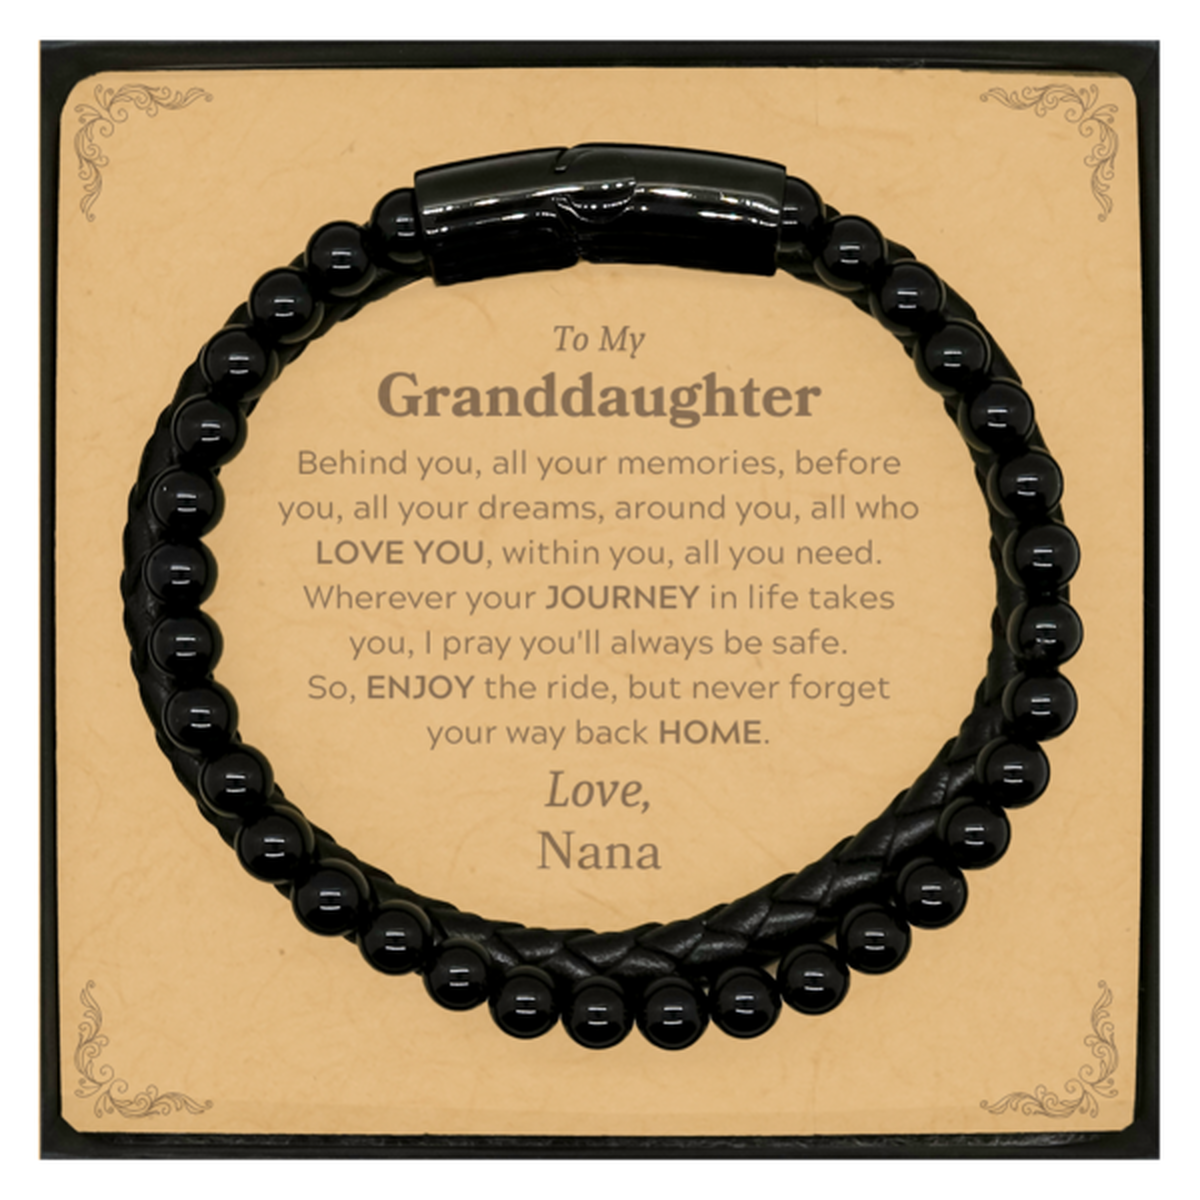 To My Granddaughter Graduation Gifts from Nana, Granddaughter Stone Leather Bracelets Christmas Birthday Gifts for Granddaughter Behind you, all your memories, before you, all your dreams. Love, Nana